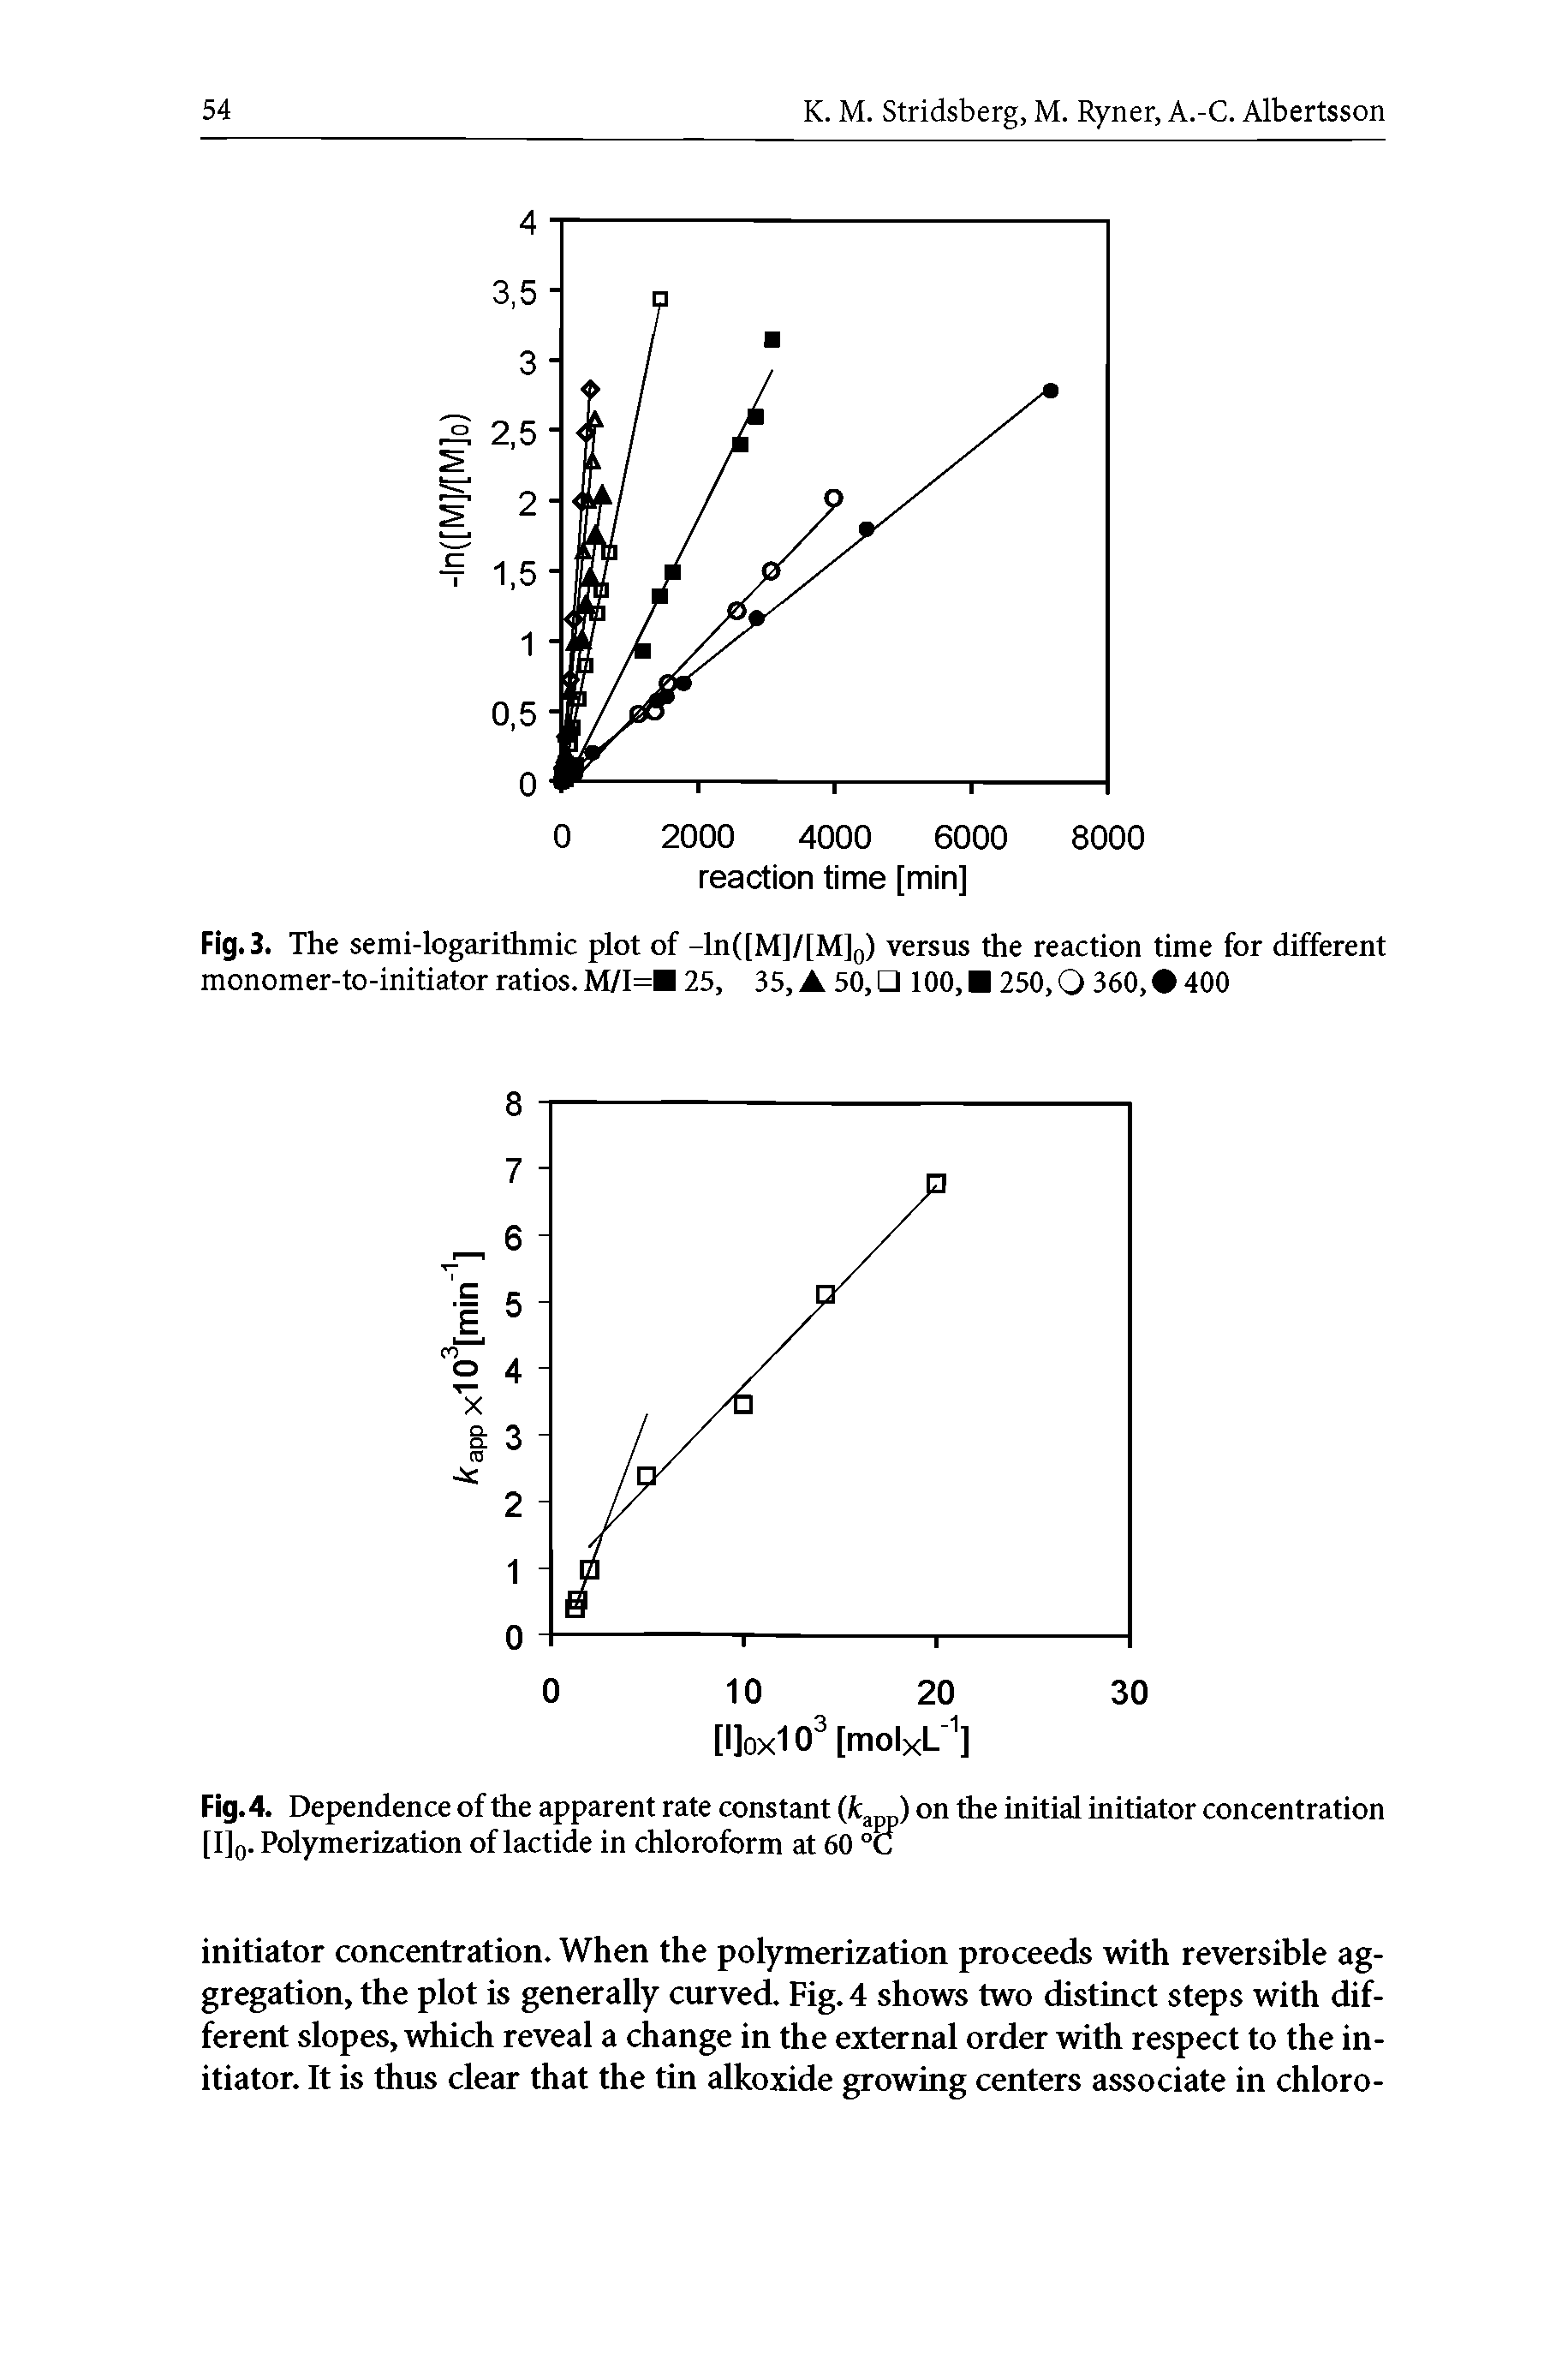 Fig. 3. The semi-logarithmic plot of -ln([M]/[M]0) versus the reaction time for different monomer-to-initiator ratios. M/I=B 25, 35, 50, 100, 250,0 360, 400...